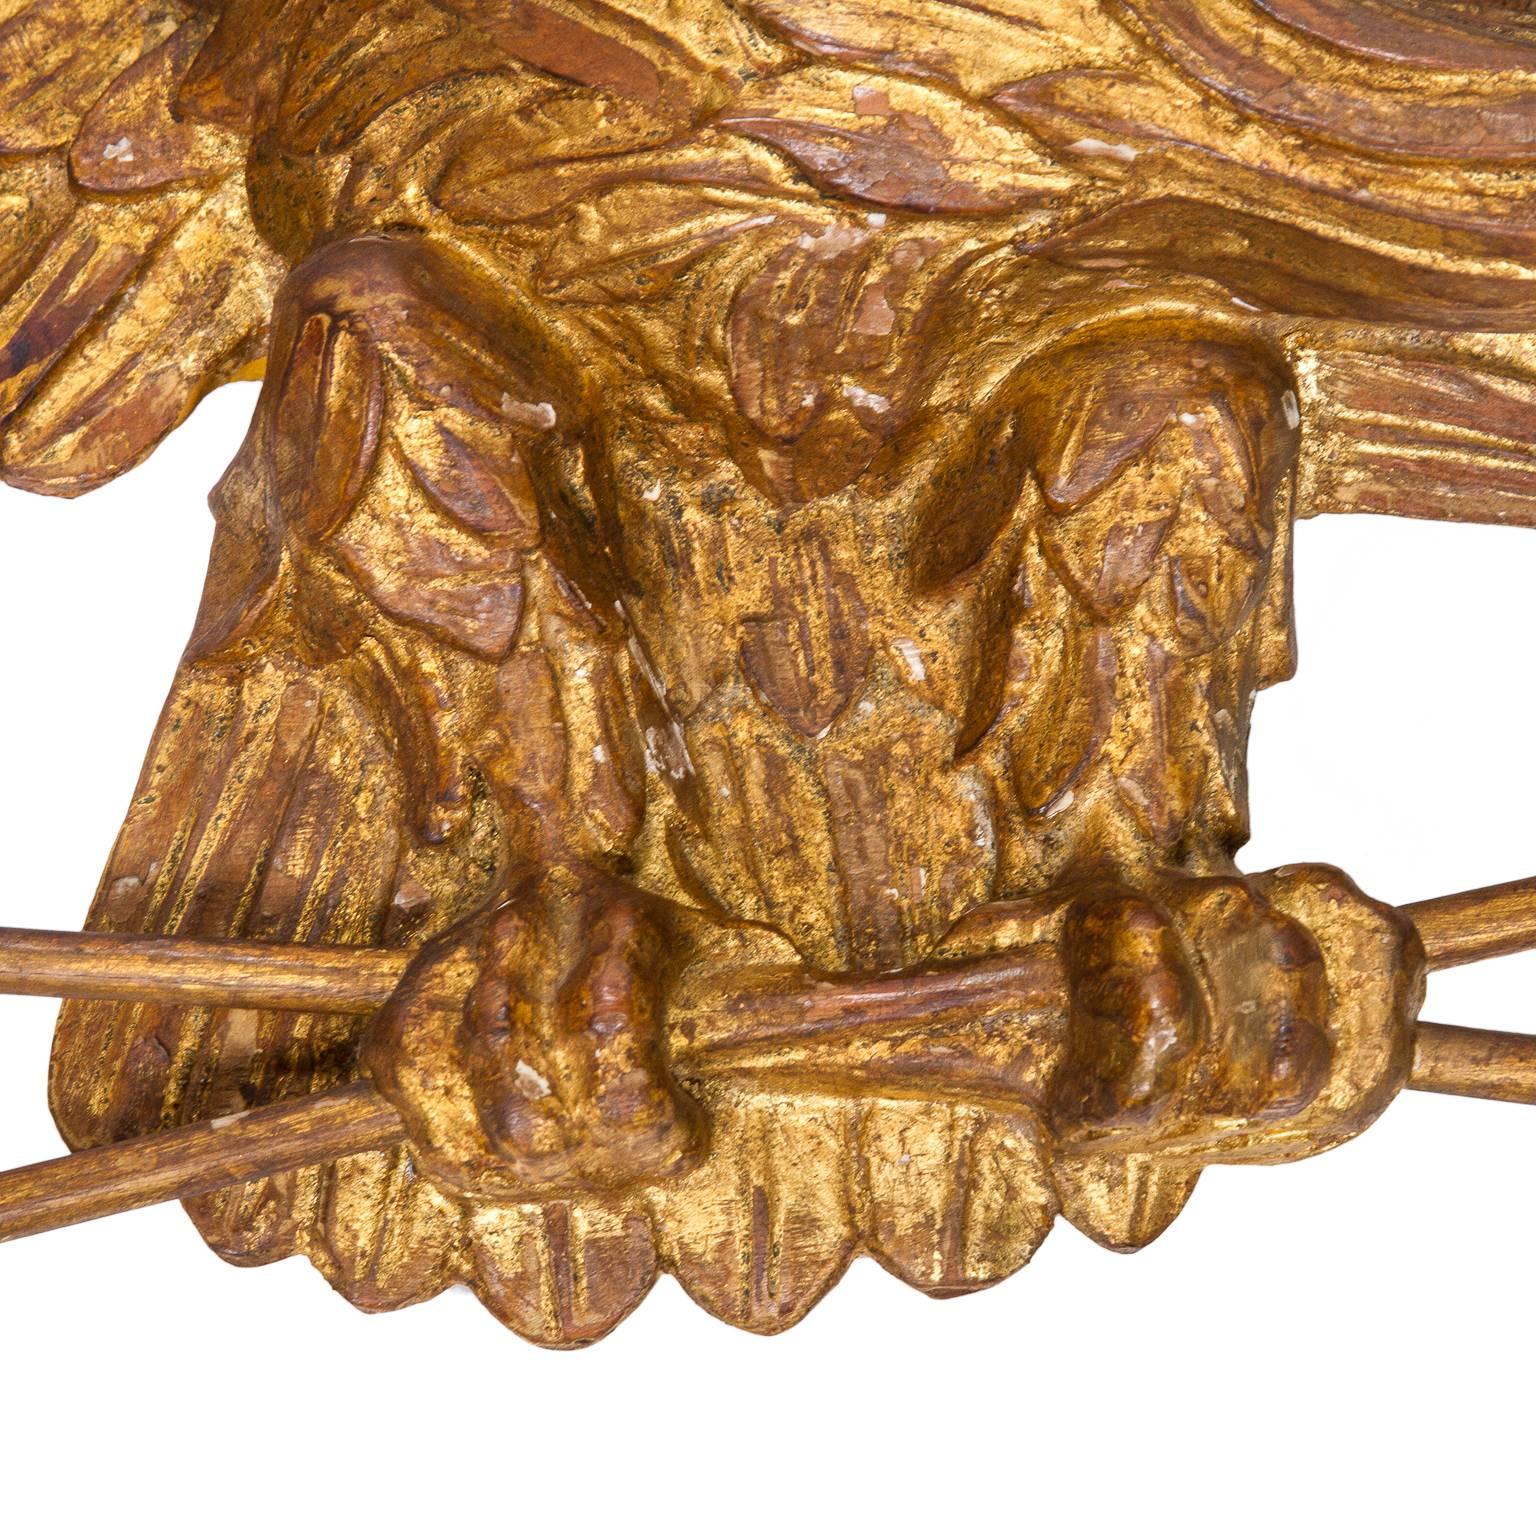 A fine Italian carved giltwood eagle holding arrows by Palladio.